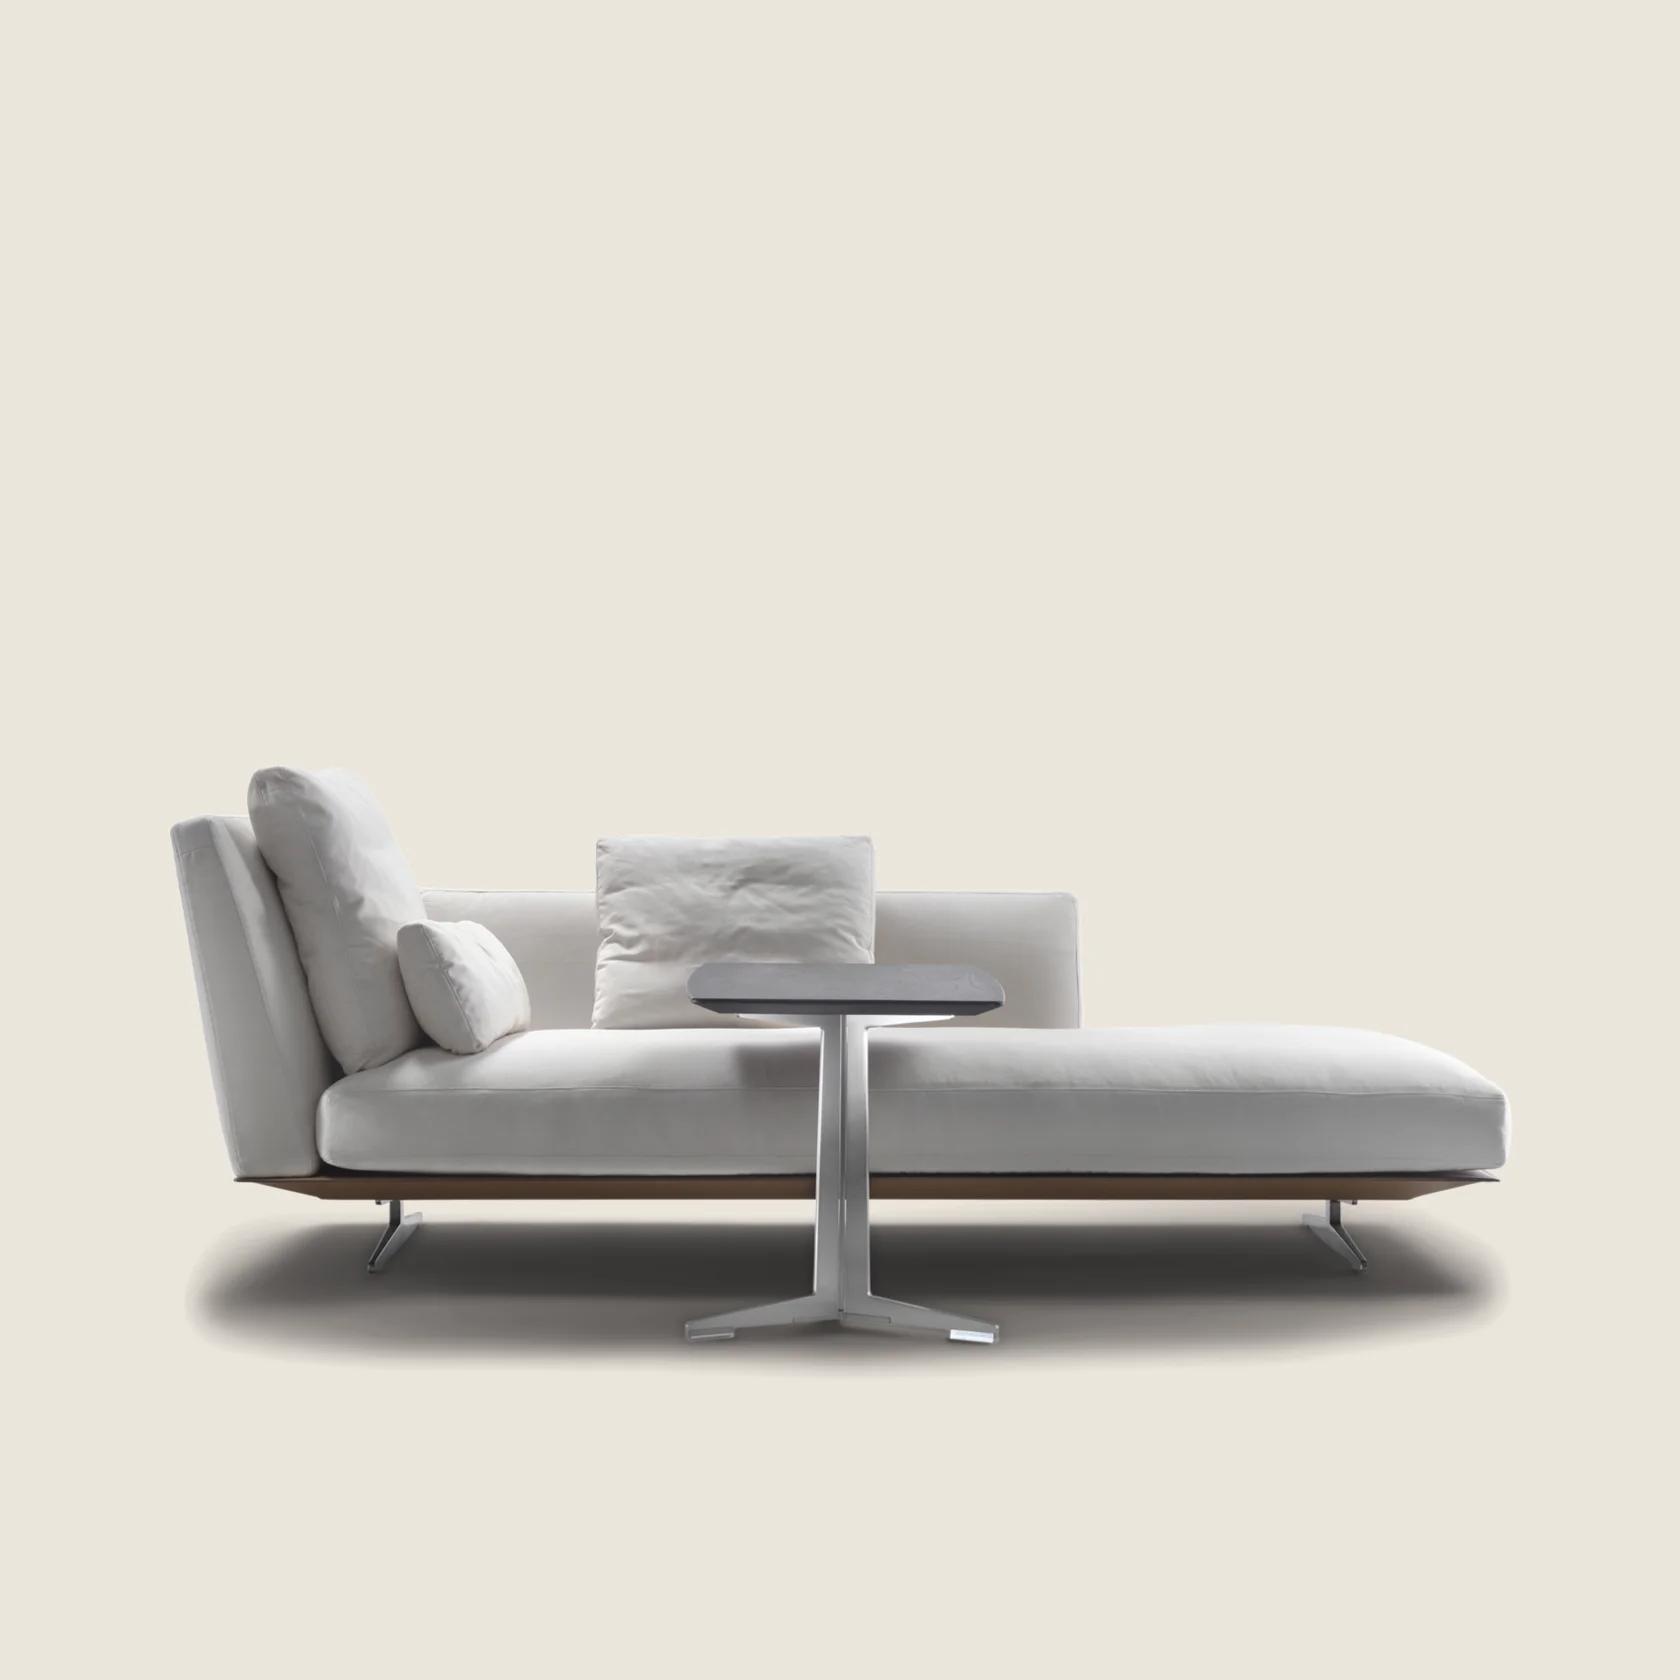 015R29_EVERGREEN_CHAISELONGUE_01.png